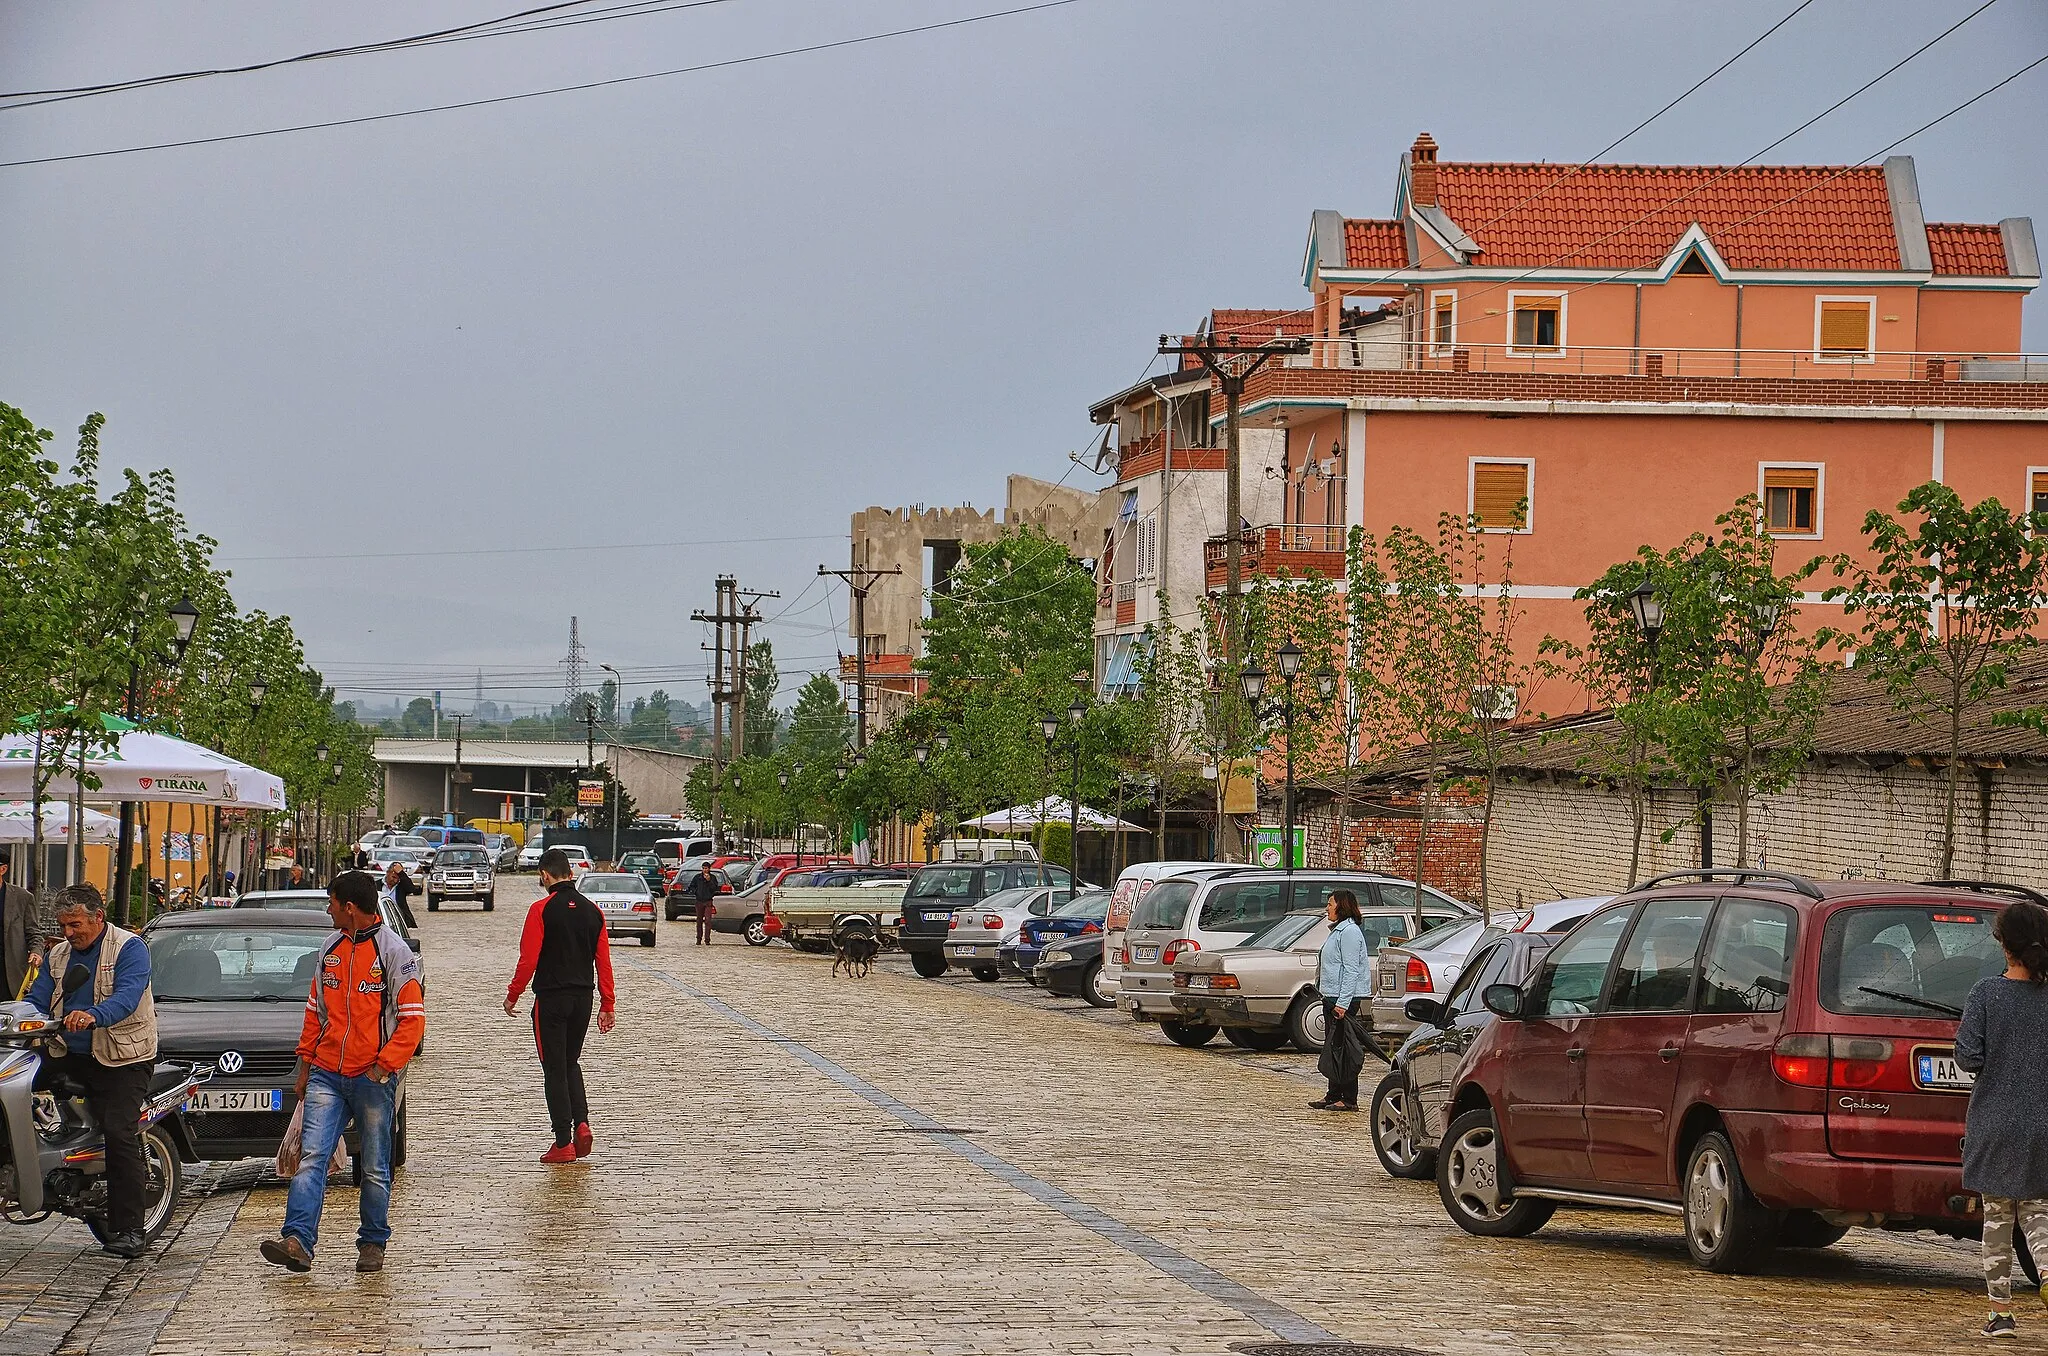 Photo showing: The pedestrian street in the center of Vau i Dejës, Albania